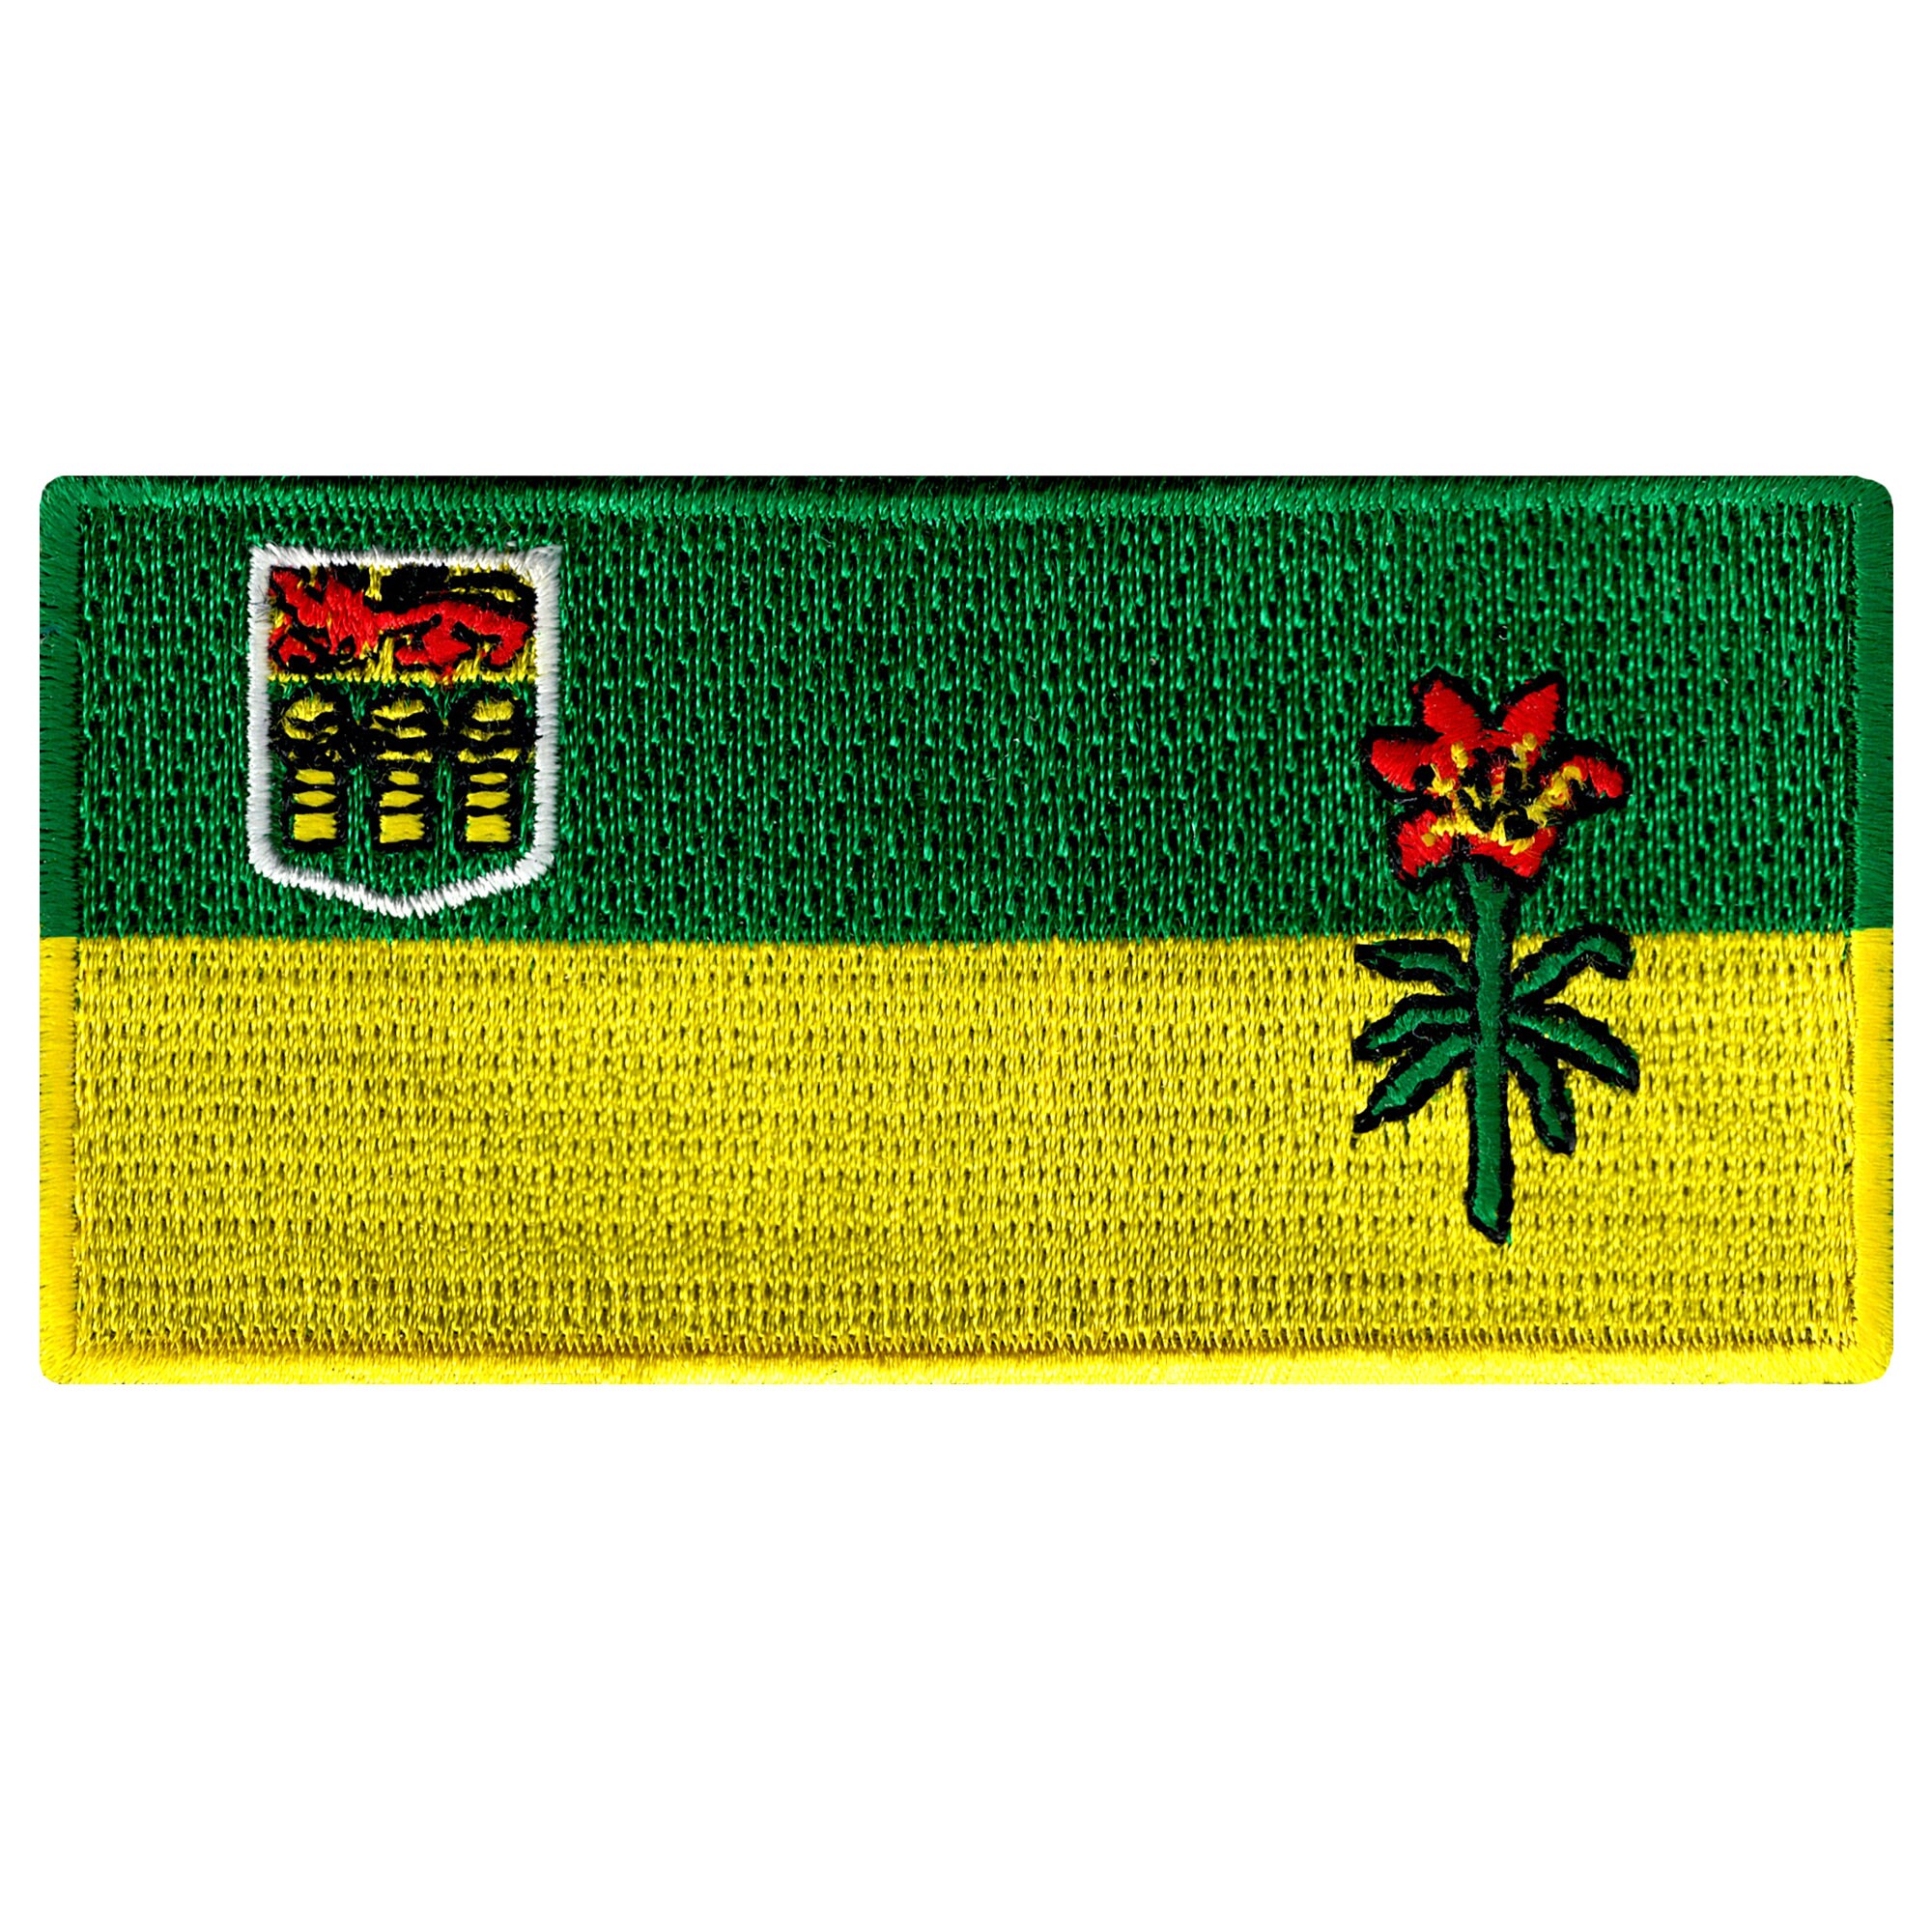 SASKATCHEWAN FLAG PATCH Canada iron-on embroidered applique Top Quality